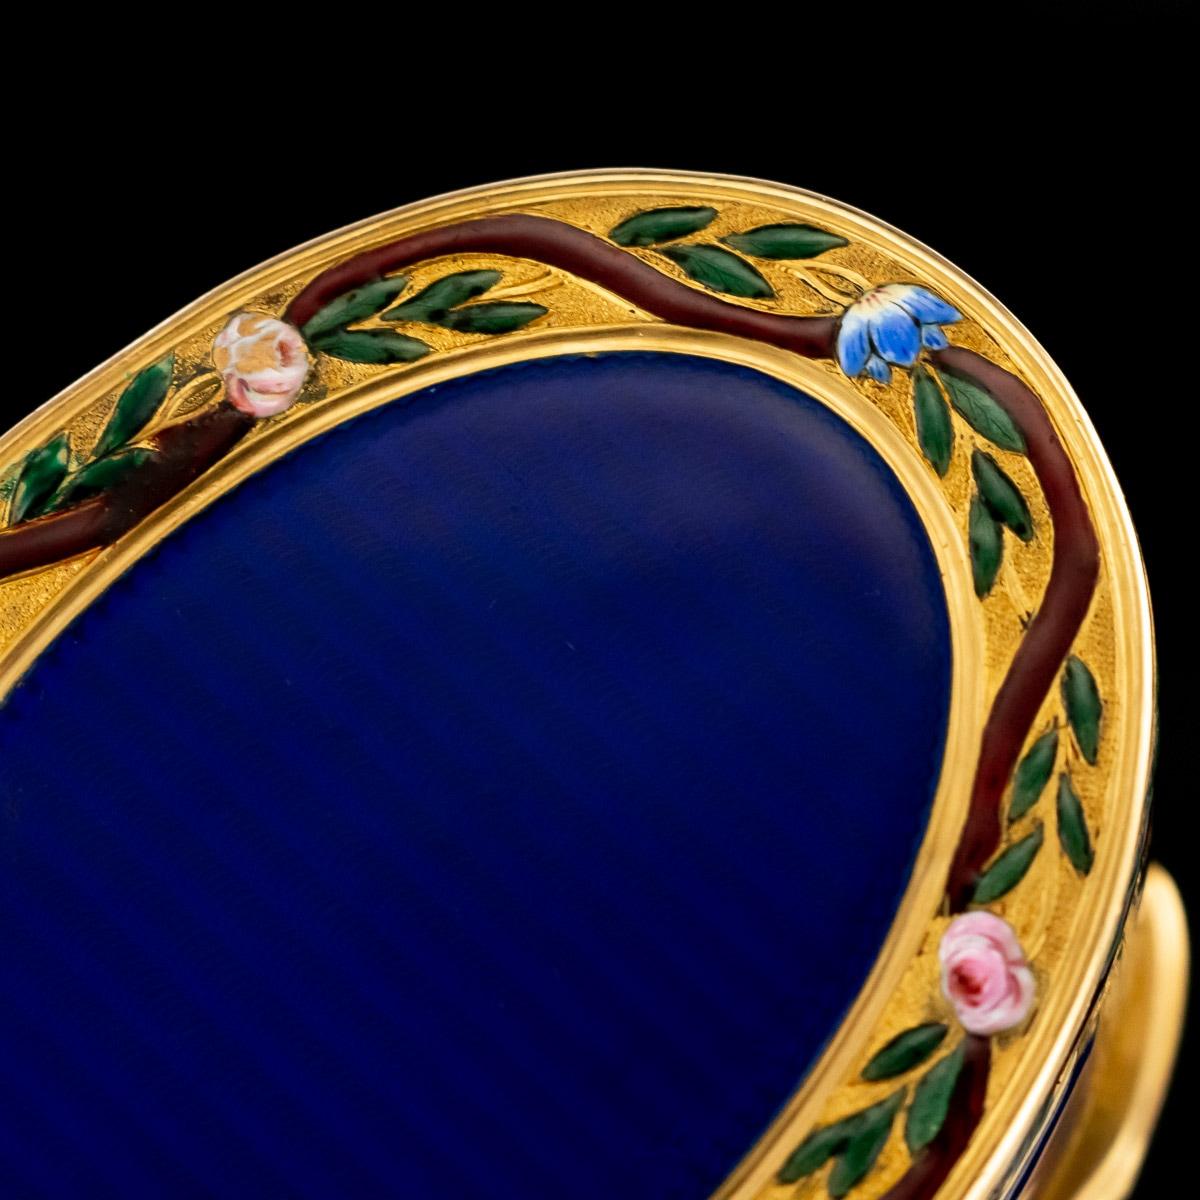 Antique French 18-Karat Gold and Hand Painted Enamel Snuff Box, circa 1770 6